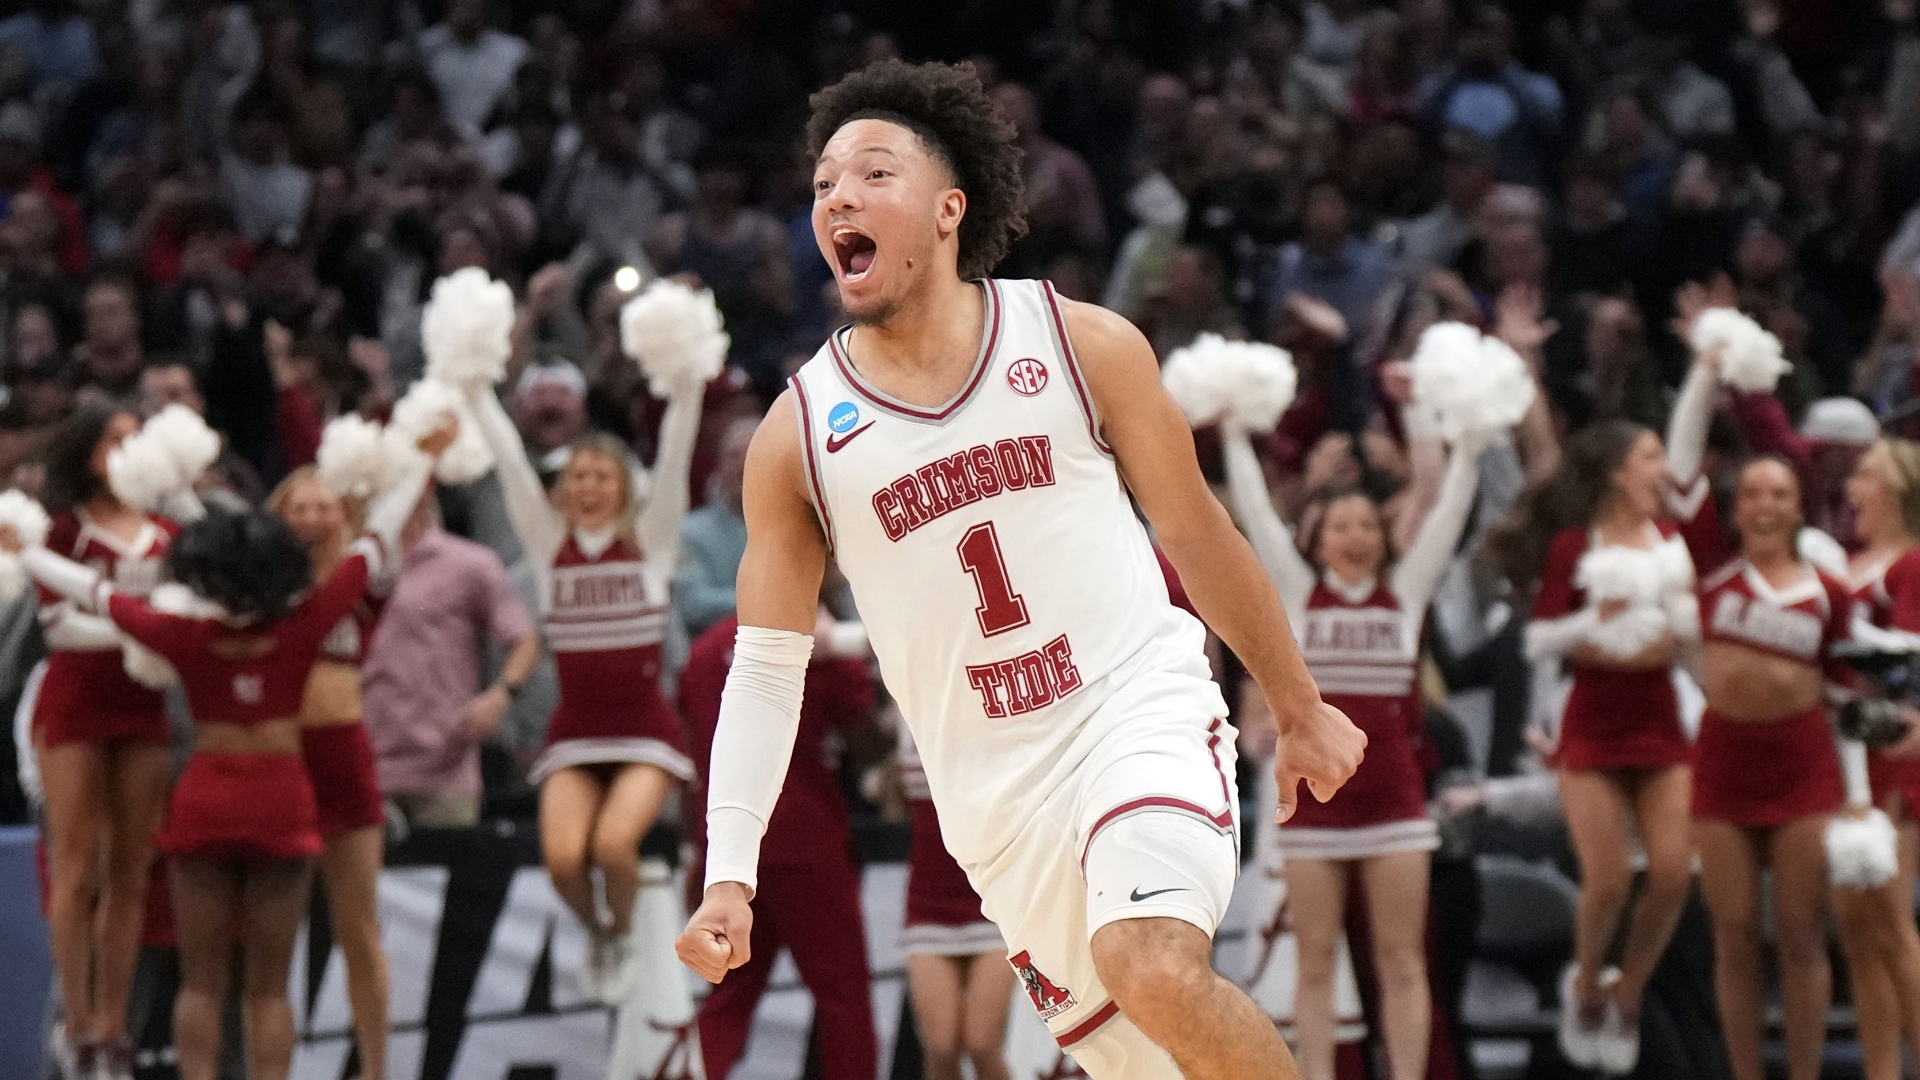 Alabama reaches first Final Four in program history